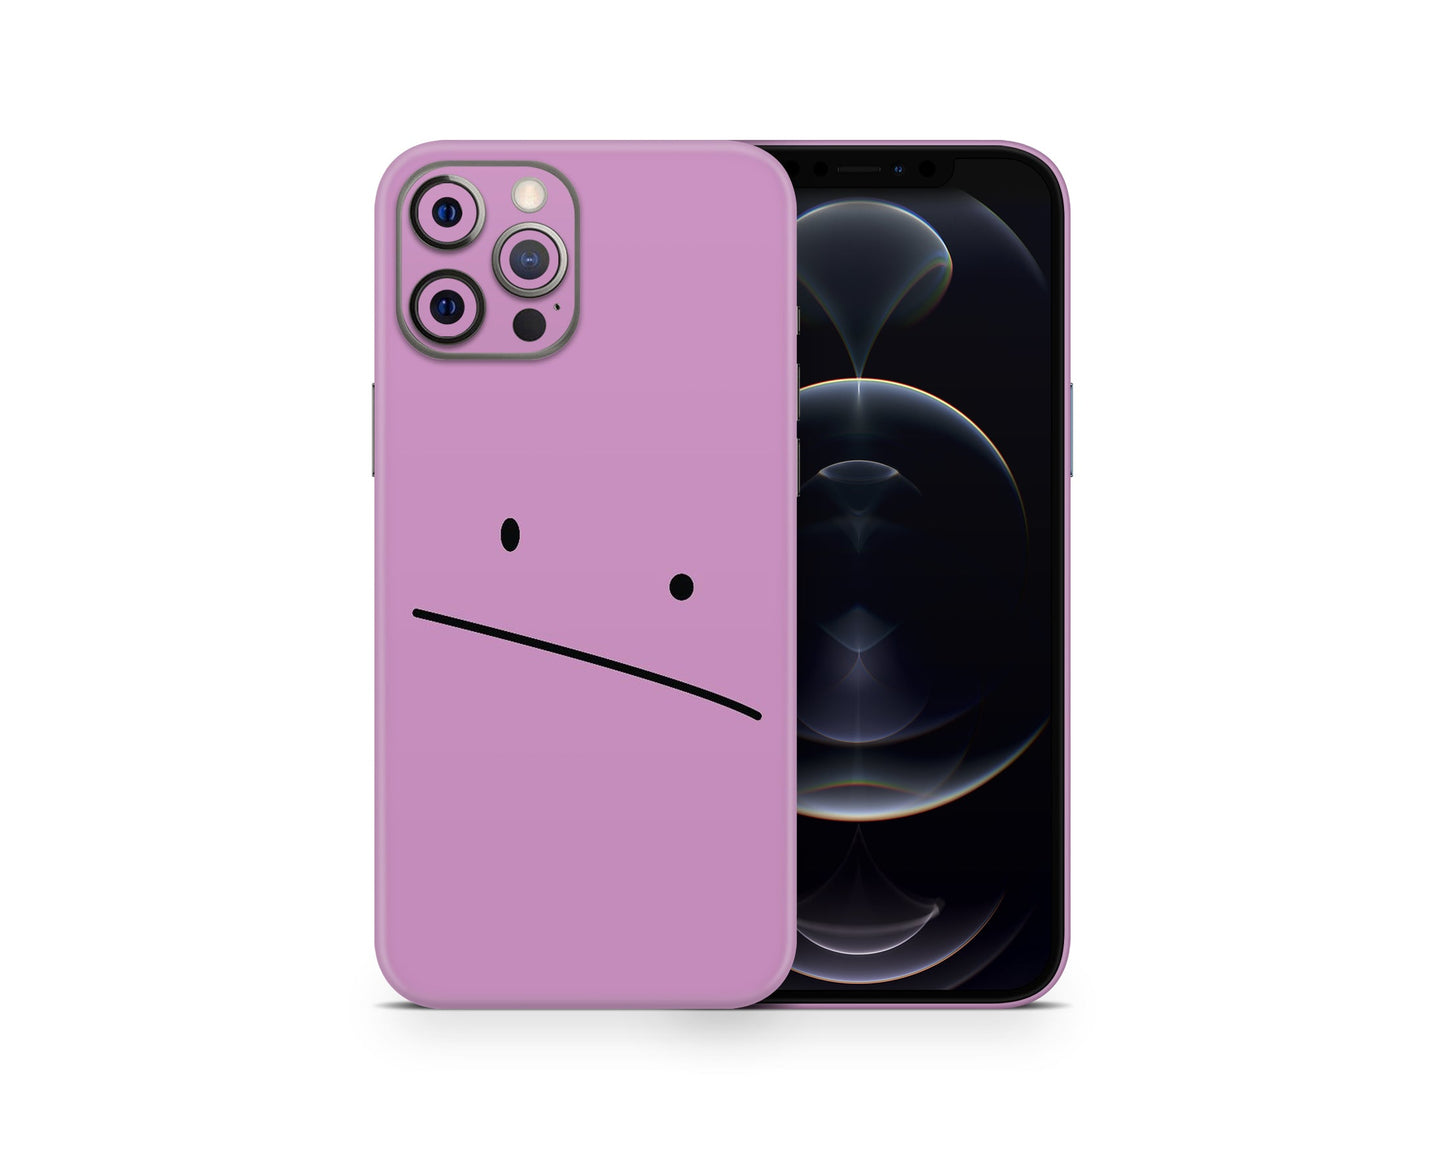 Lux Skins iPhone Pokemon Ditto iPhone 13 Pro Max Skins - Pop culture Pokemon Skin